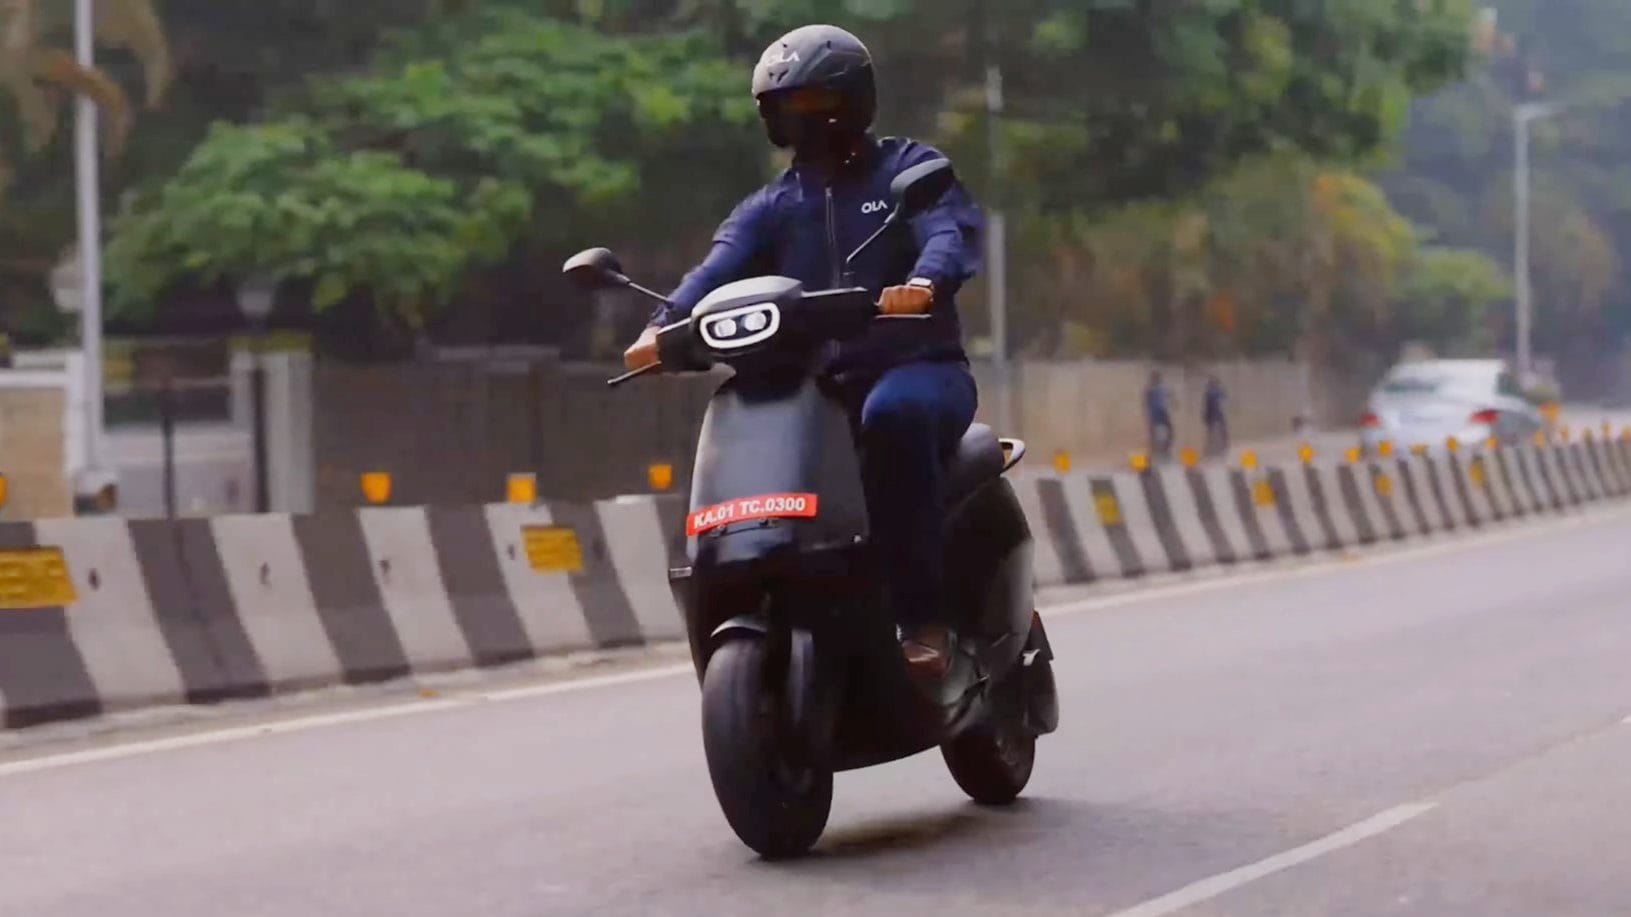 Launch of Ola's electric scooter is understood to be just around the corner. Image: Ola Electric